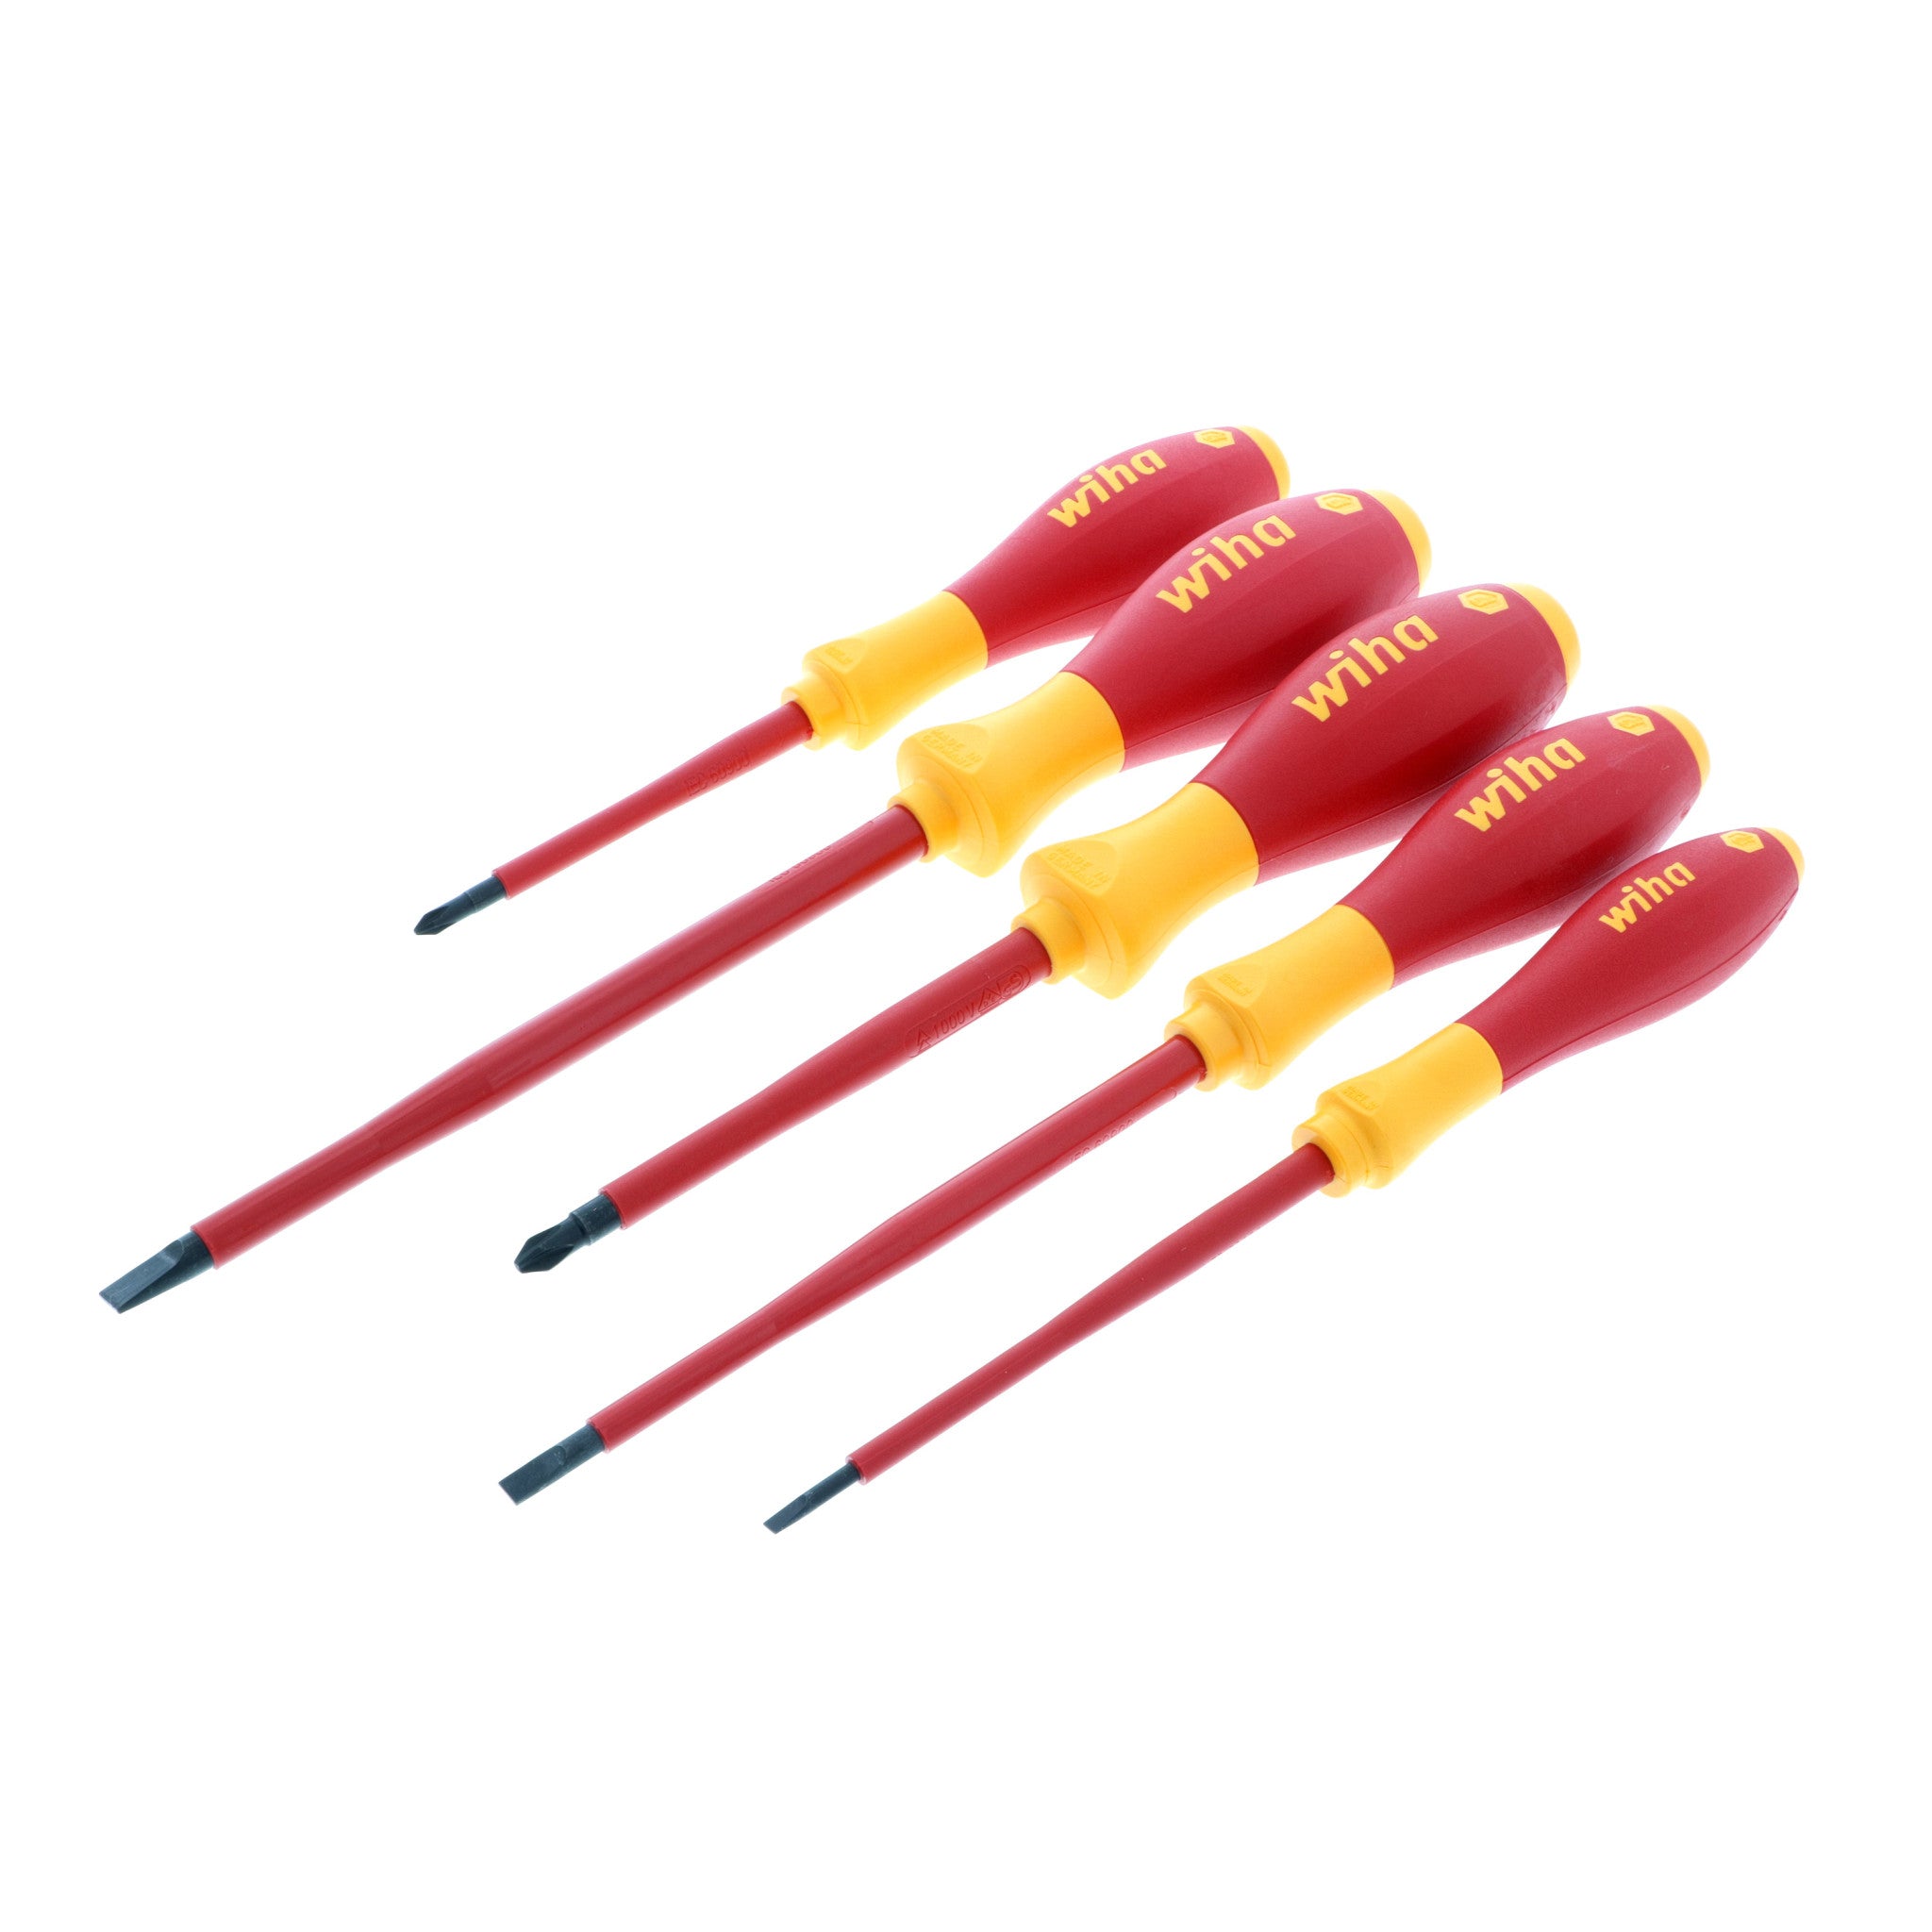 Wiha 10891 Interchangeable Blade Screwdriver Set, Slotted and Phillips, ESD  Safe, 4 Piece - Screwdriver Canvas Roll Up 